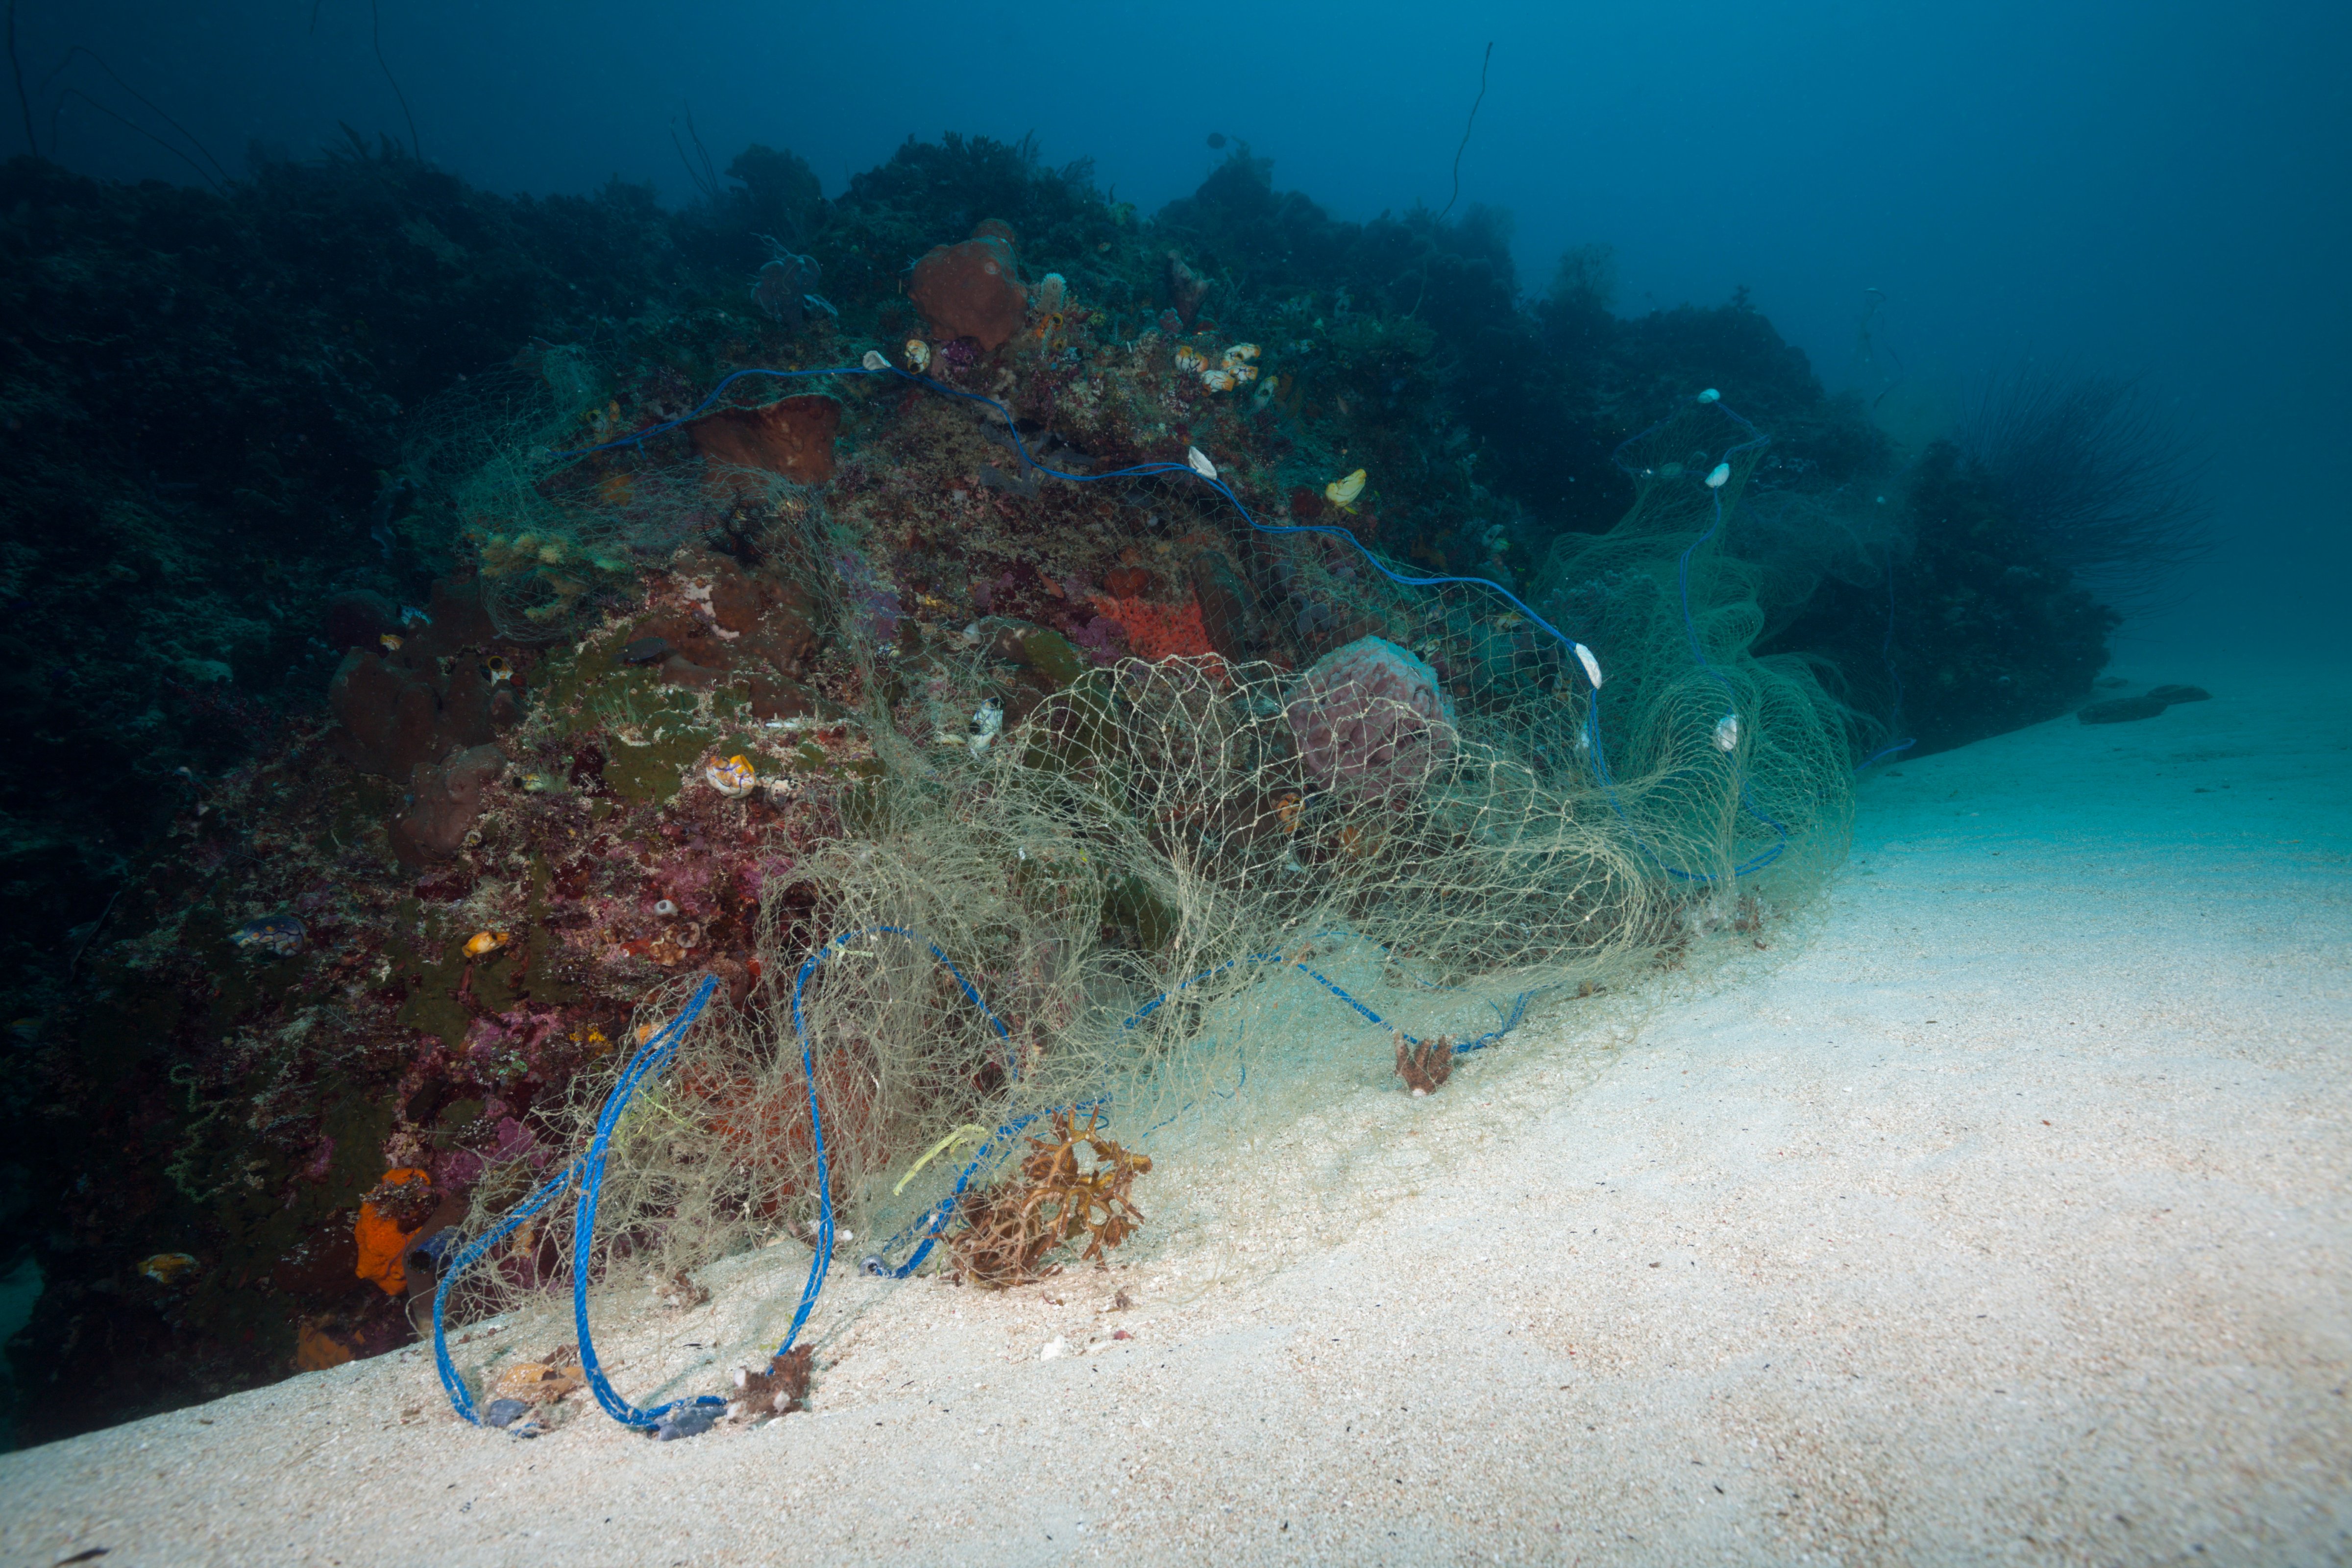 Lost Fishing Net covers Coral Reef, Indo Pacific, Indonesia